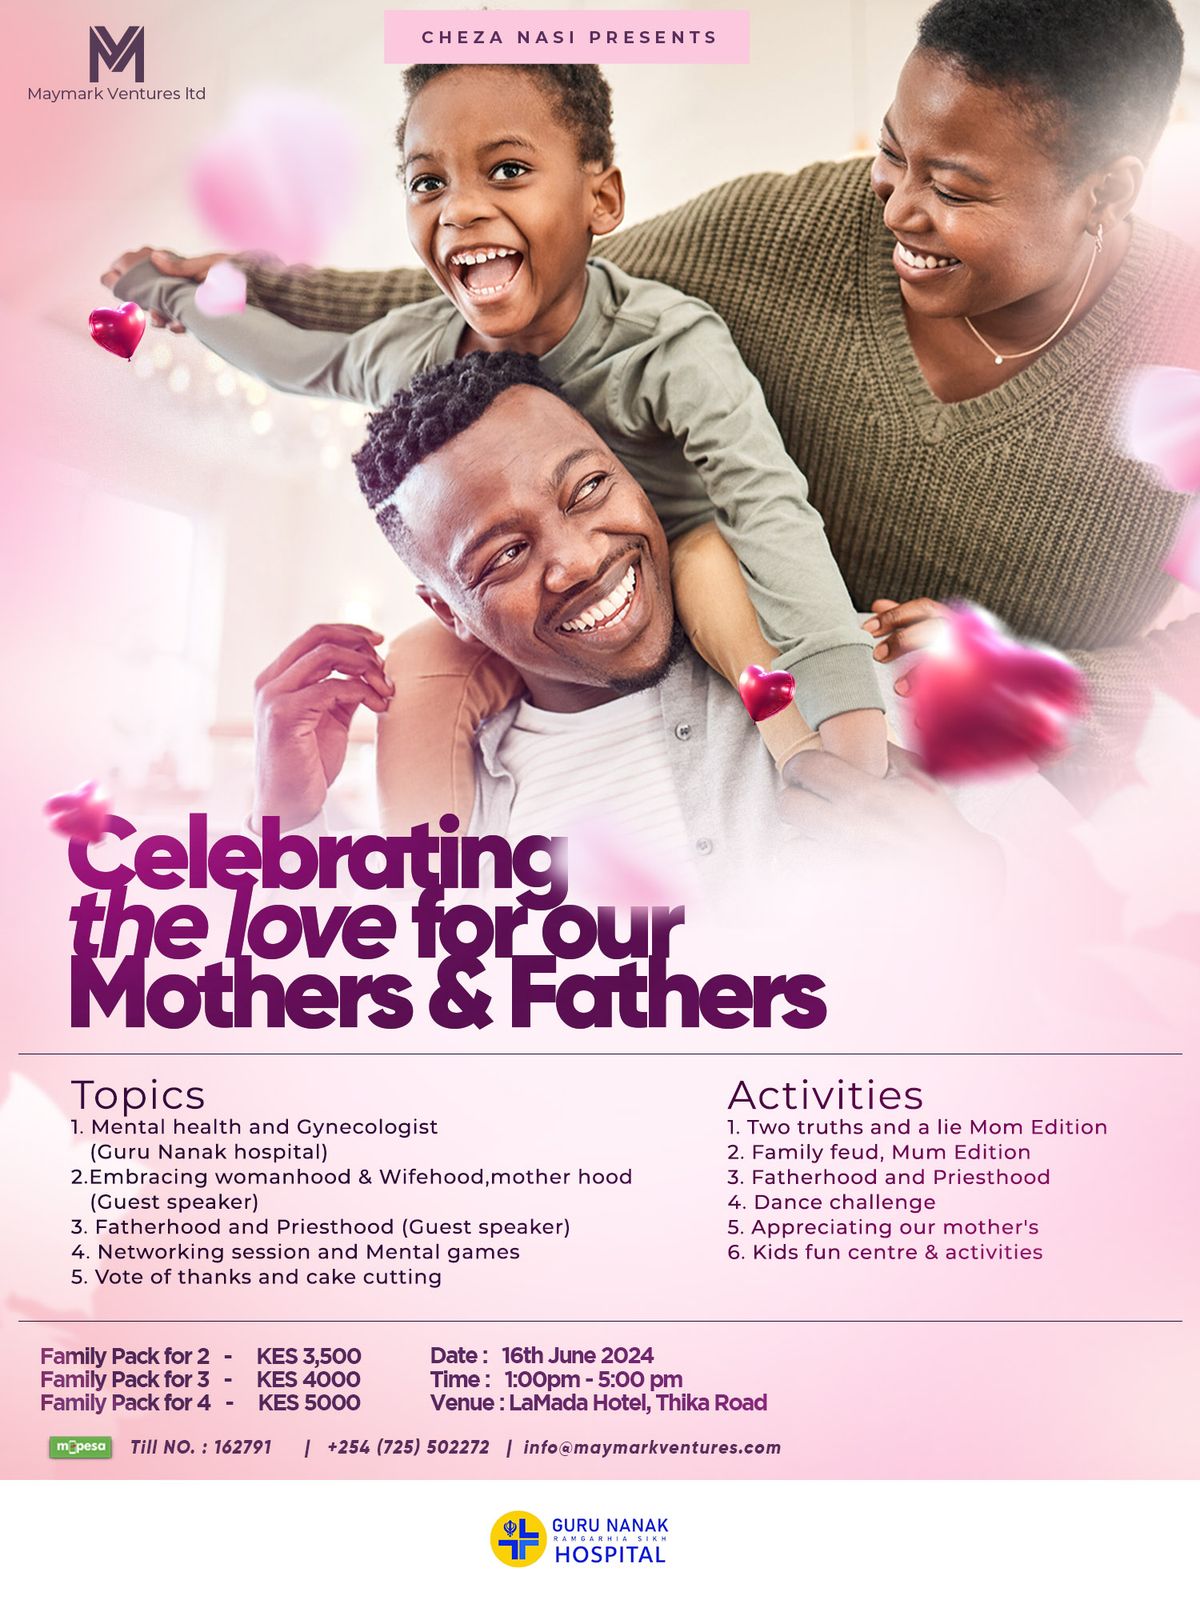 Celebrating the love for our Mothers & Fathers event 2024